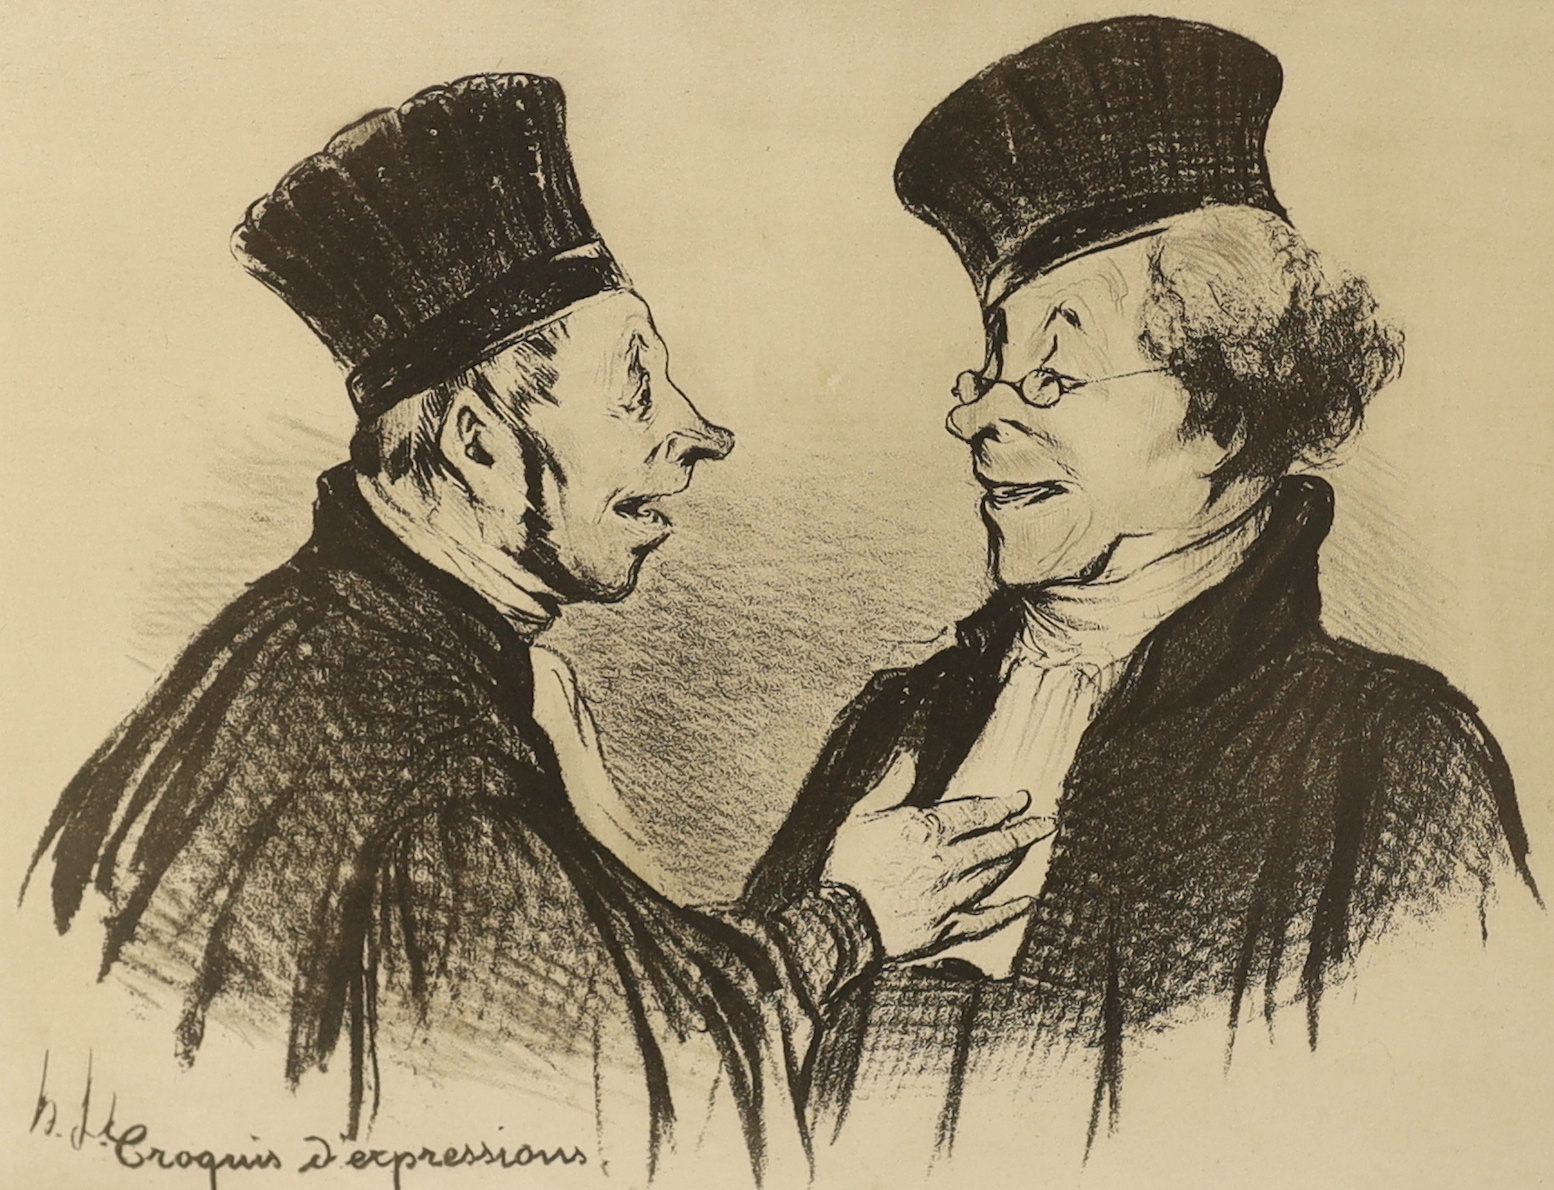 Honoré Daumier (French, 1808-1879), lithograph, ‘Croquis d'Expressions’, signed in pencil, 27 x 36cm